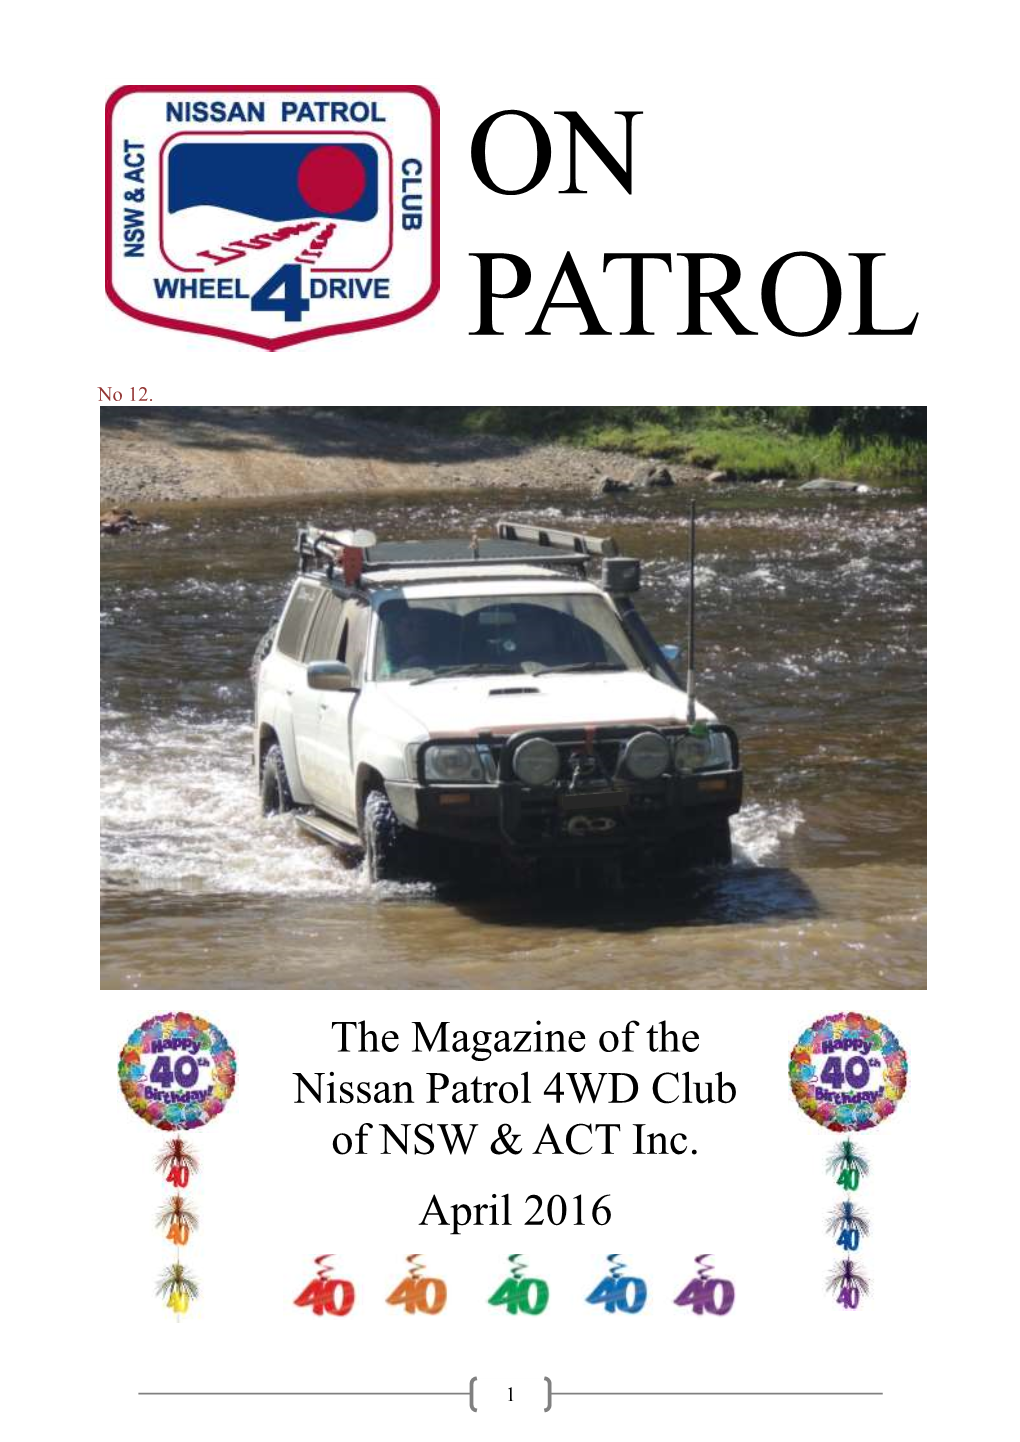 The Magazine of the Nissan Patrol 4WD Club of NSW & ACT Inc. April